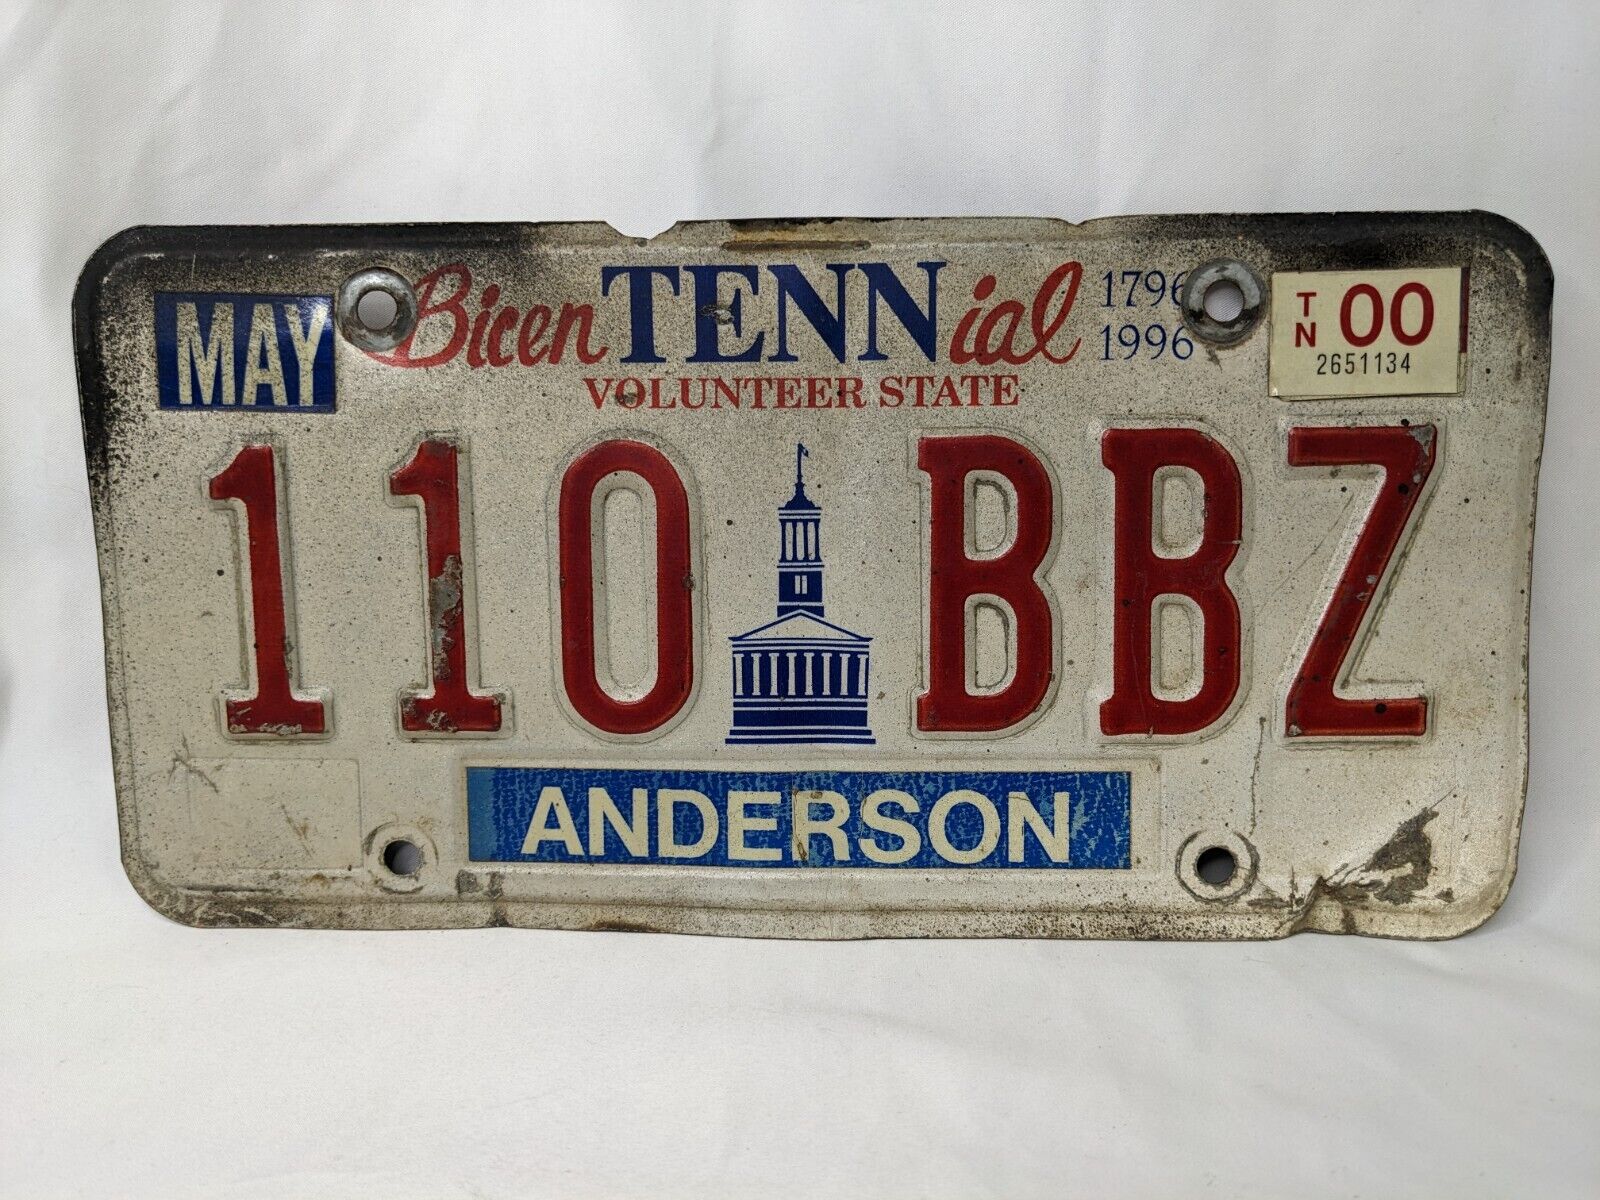 Vintage Tennessee License Plate BicenTENNial 110 BBZ Anderson May 2000